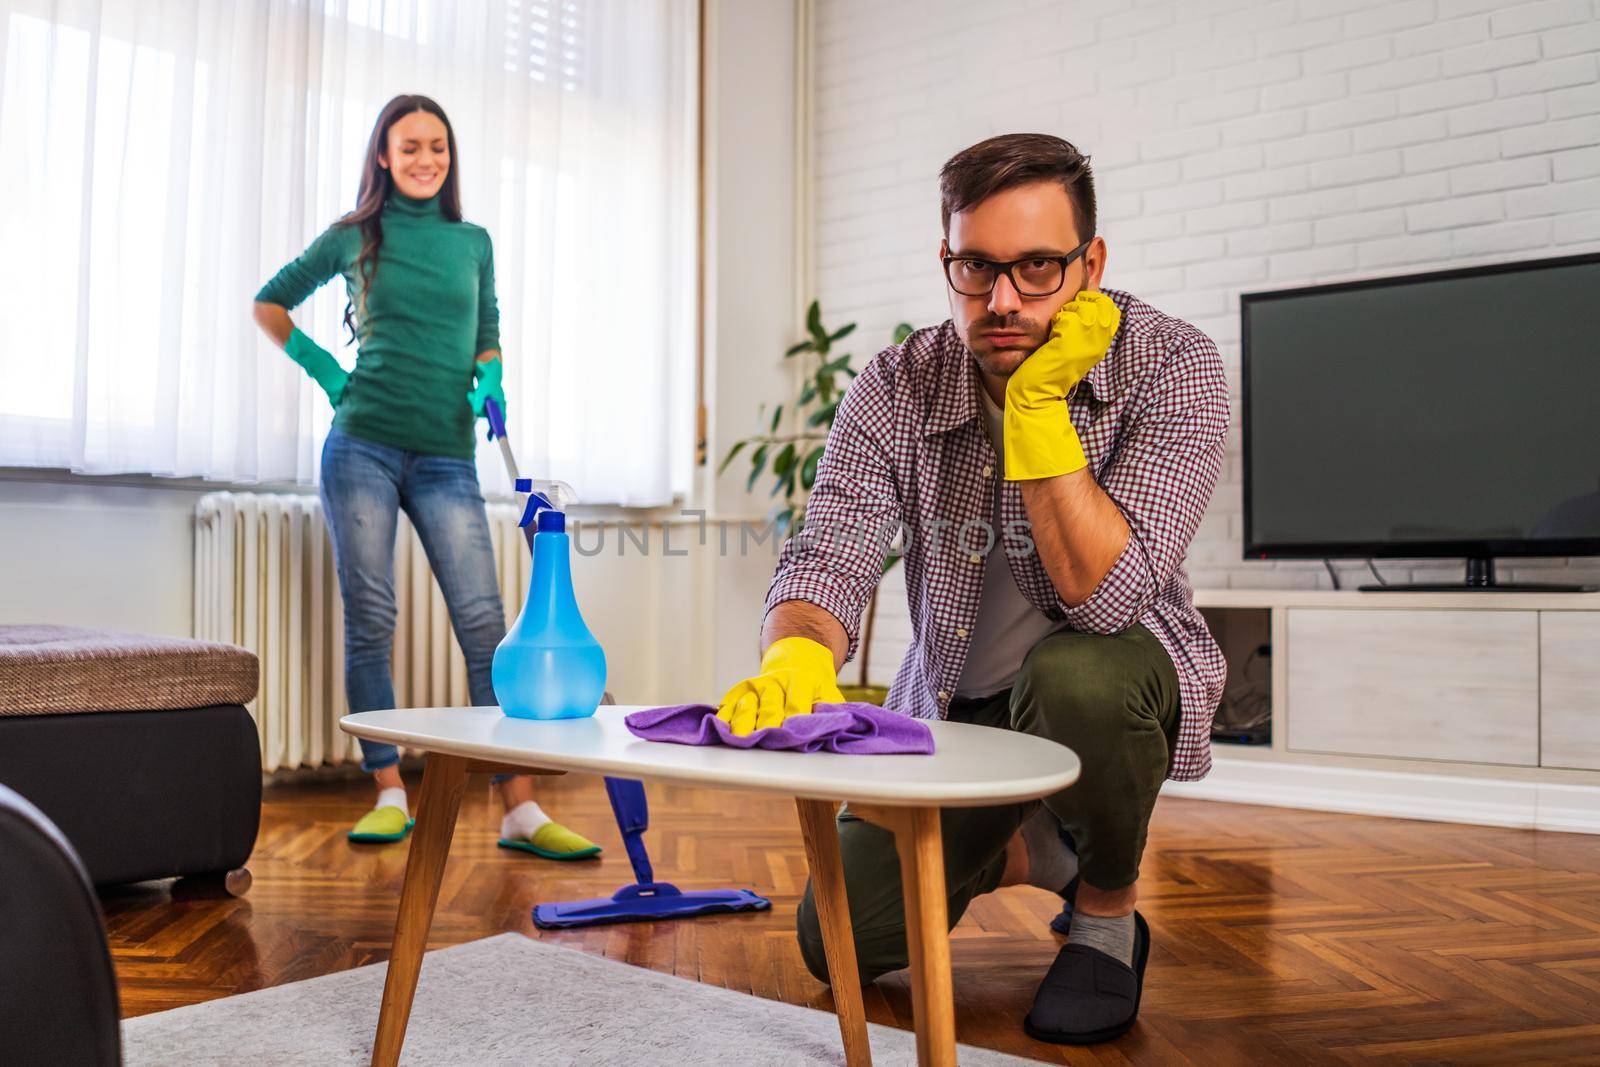 Man is tired of cleaning the apartment. Woman is angry.